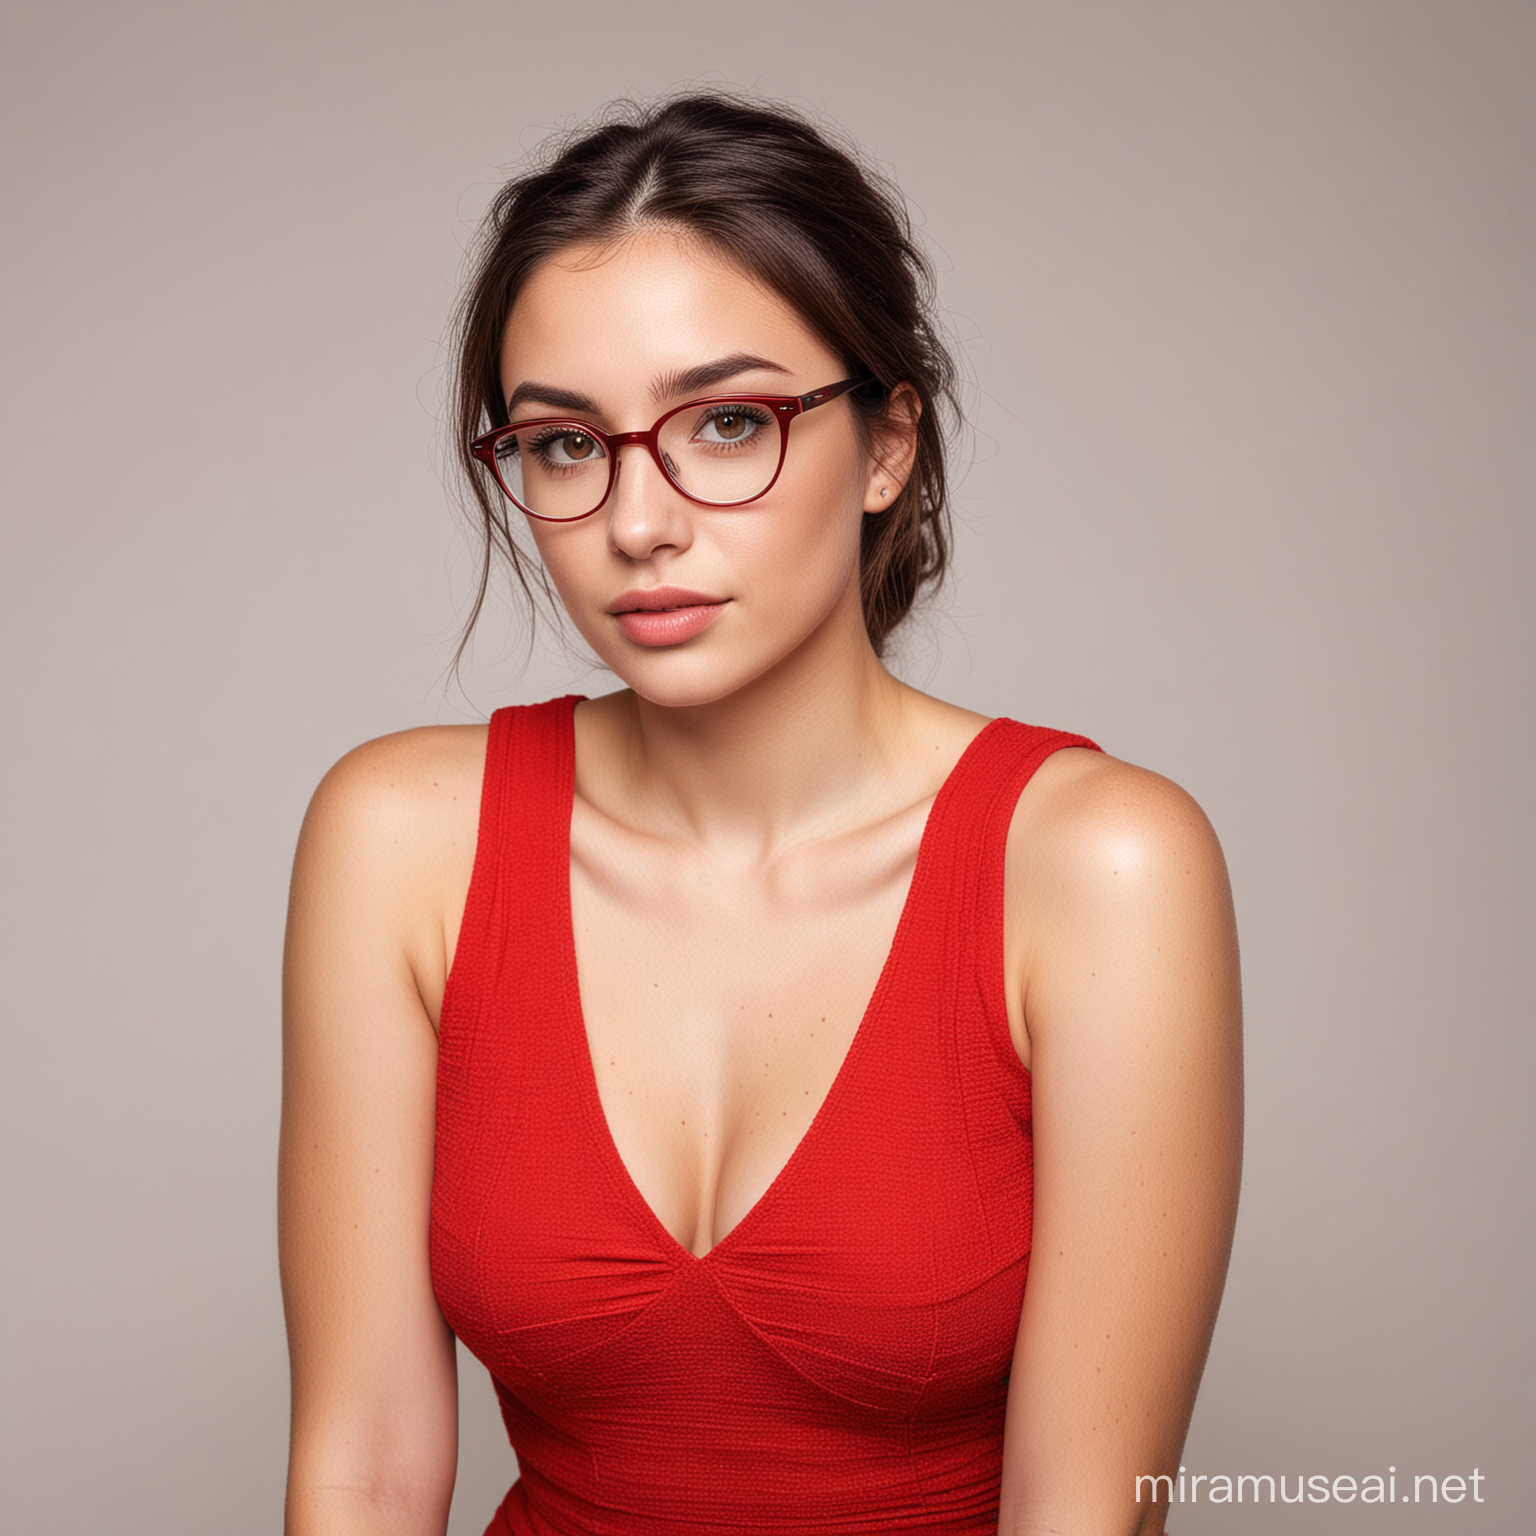 a young woman, brown eyes, wearing glasses, wearing red dress, white background